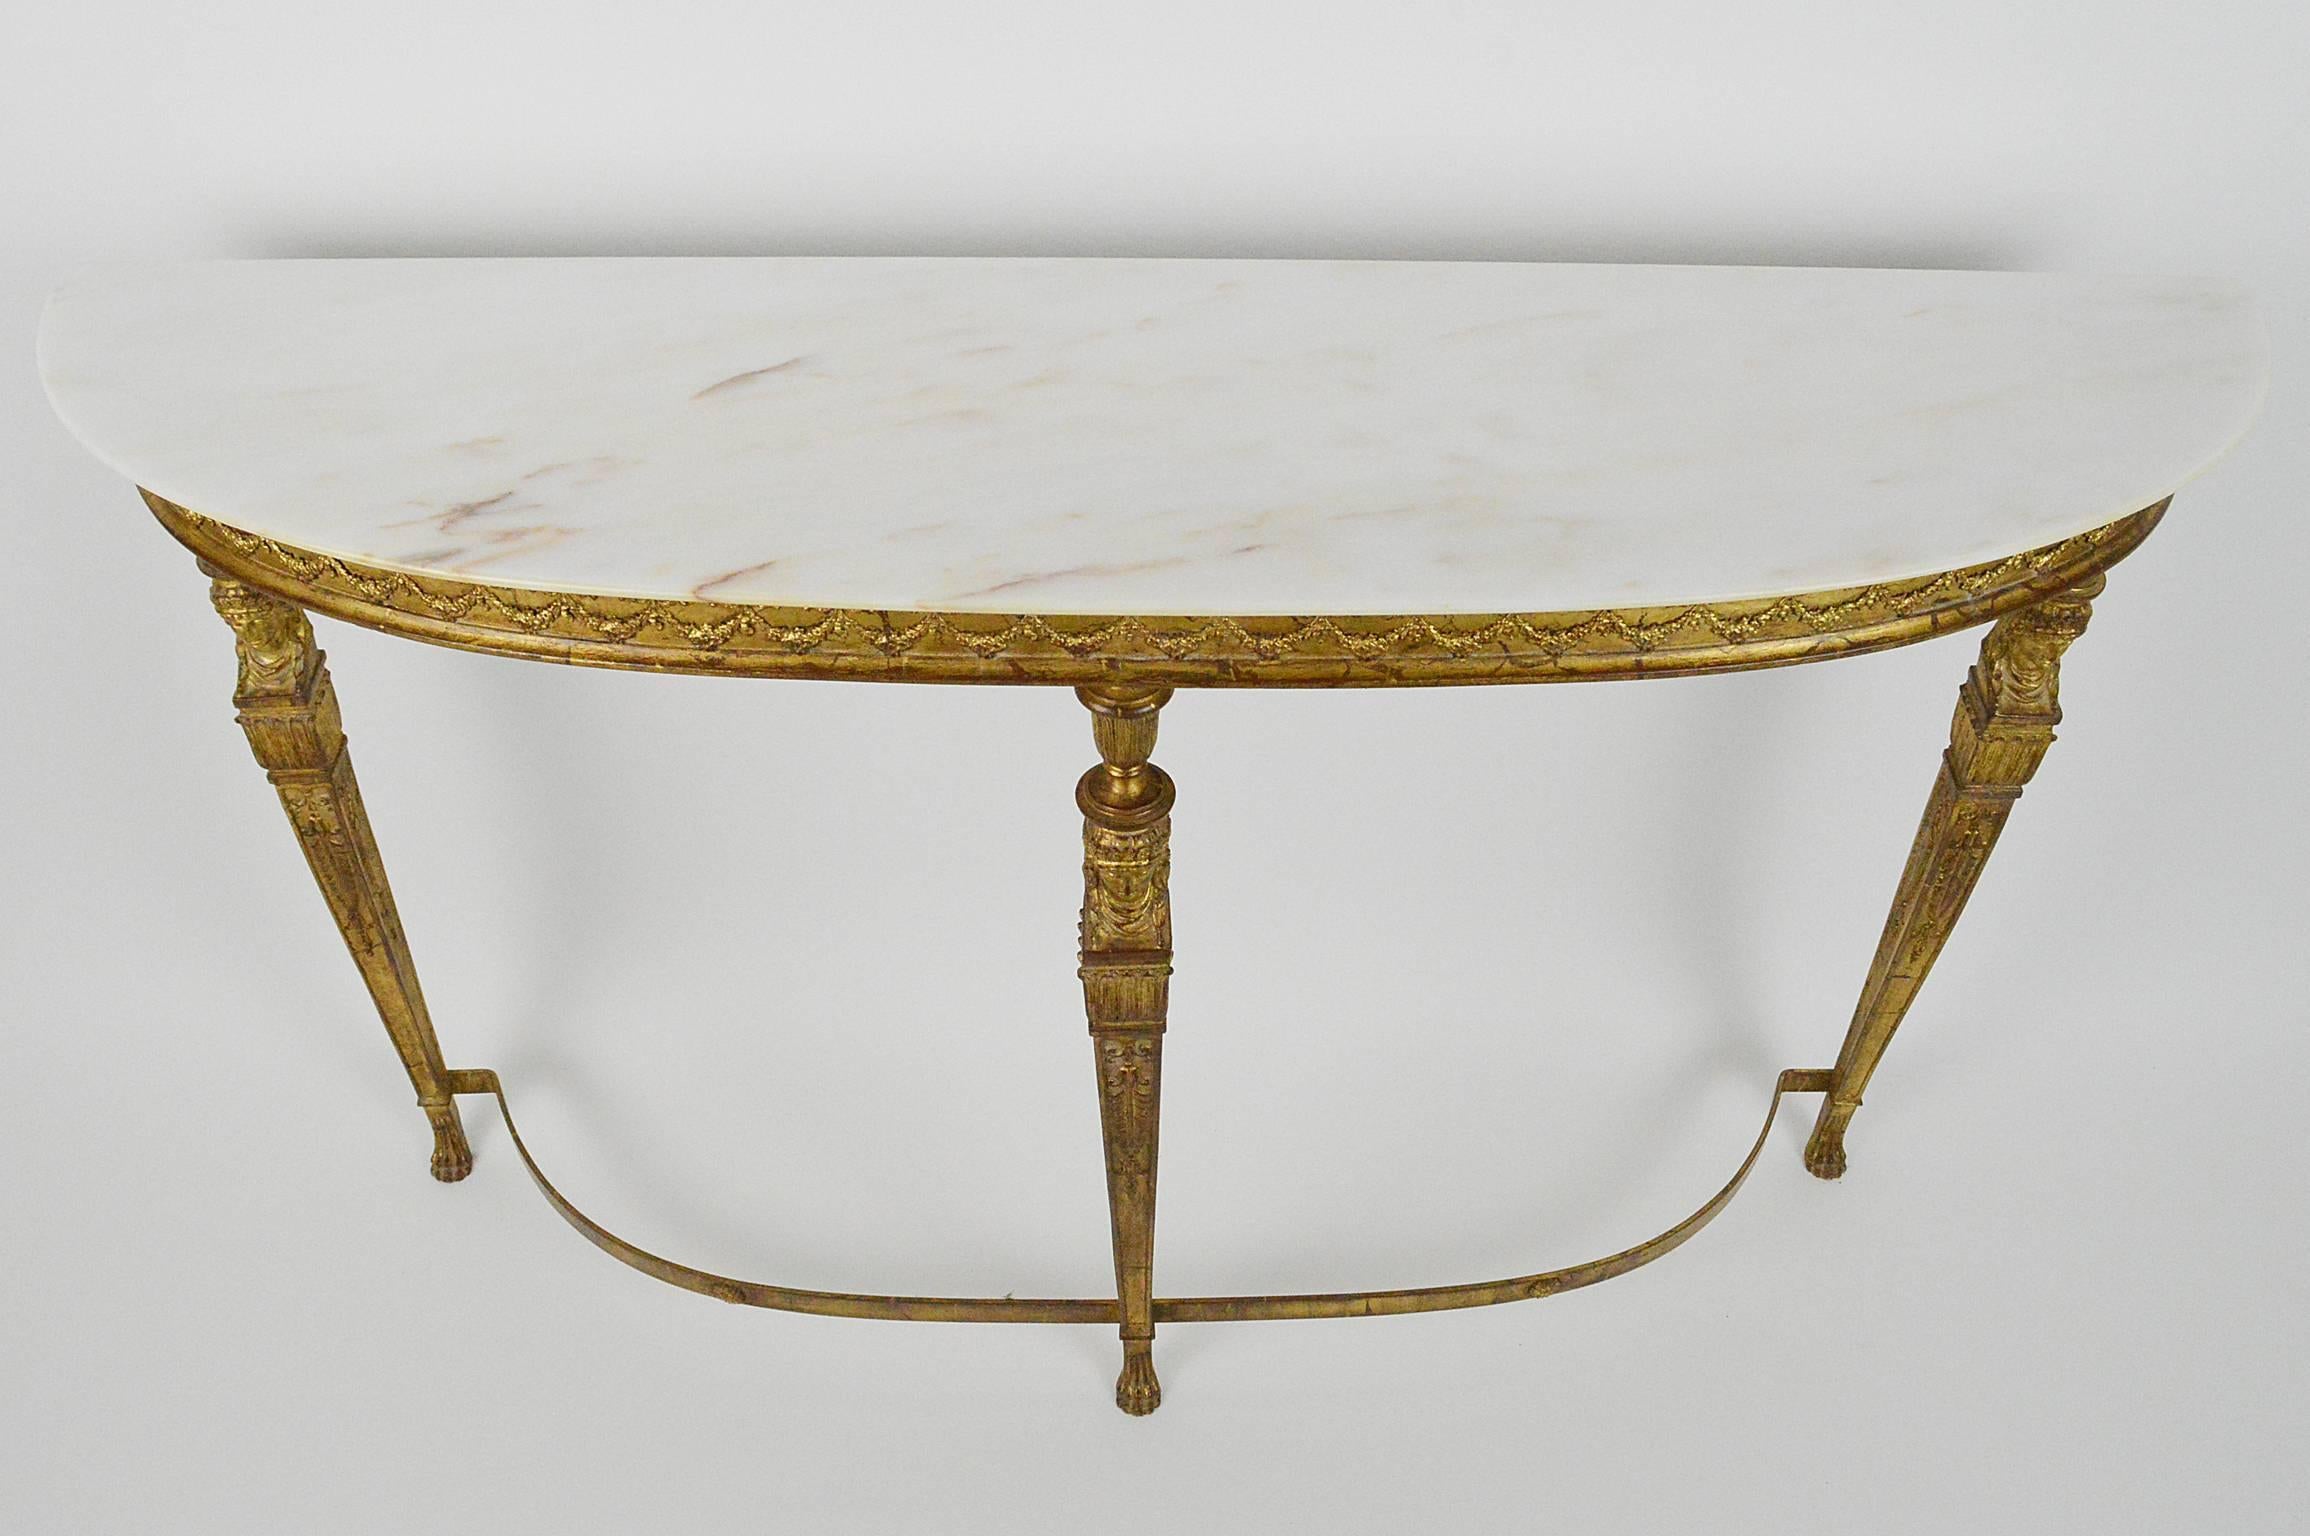 Empire style marble-top and gilt bronze console table.